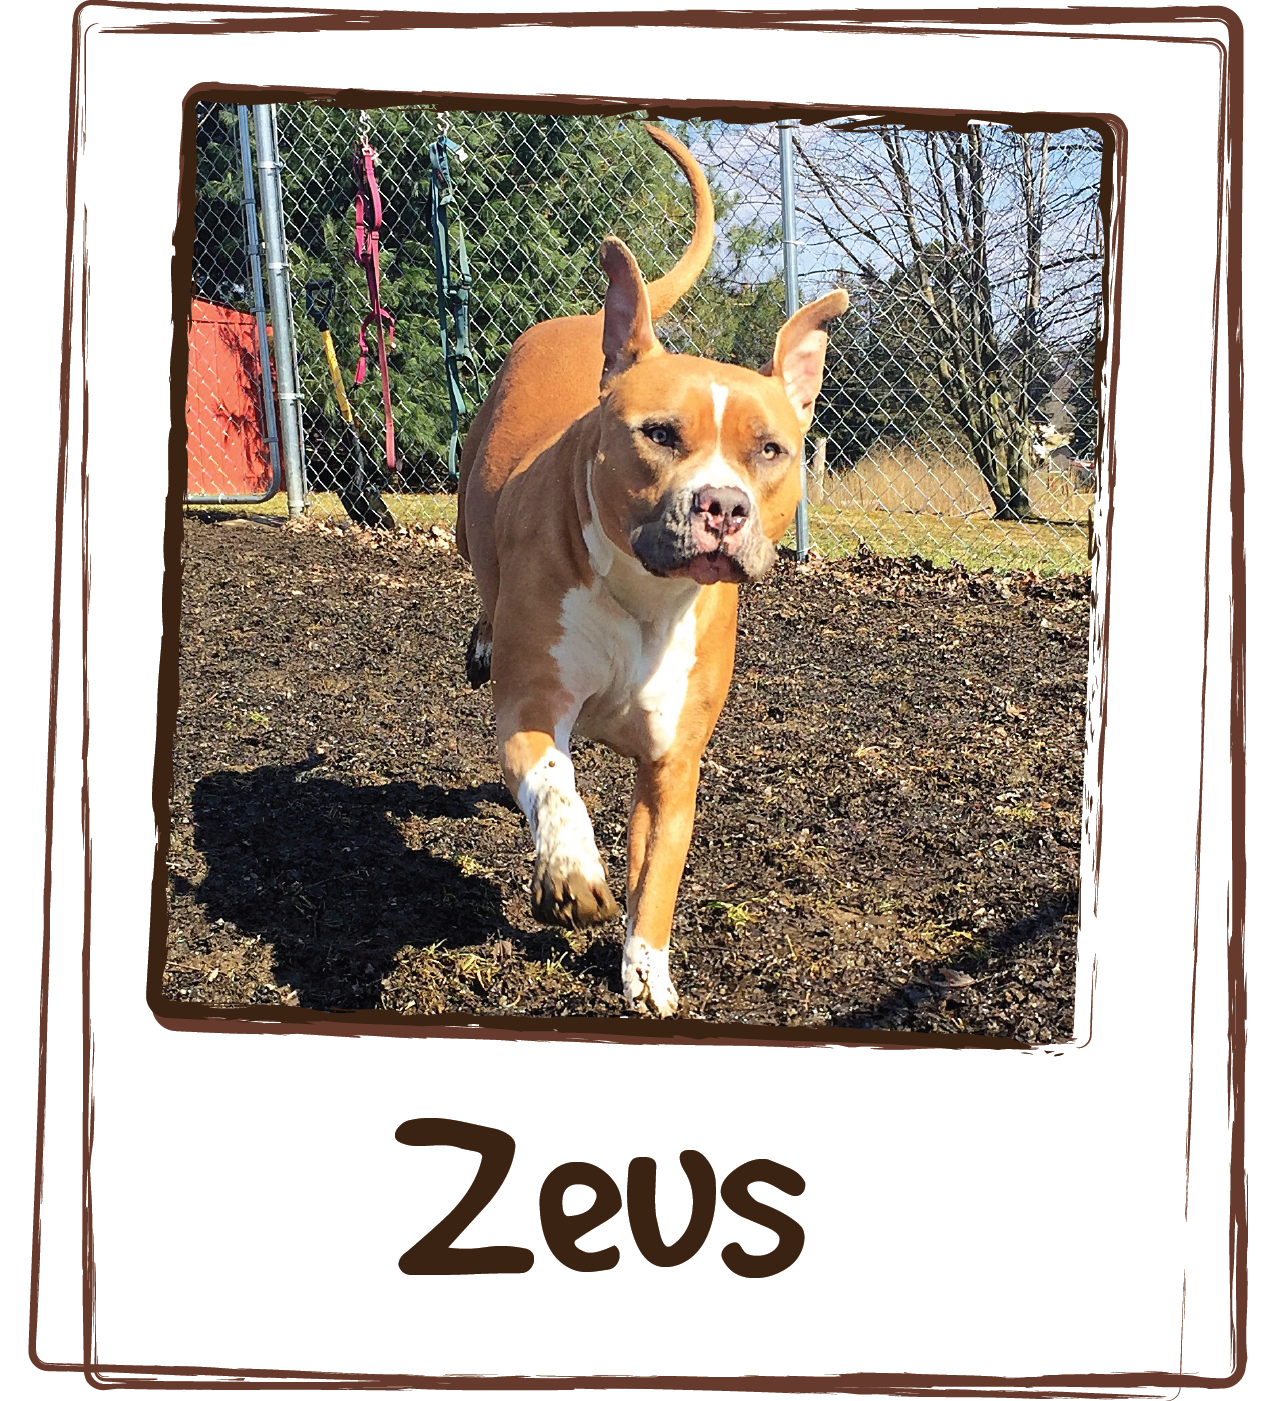  “I am so happy that your products exists! Zeus partially tore his ccl and his leg has bothered him ever since. He’s had a hard time getting up after naps and running for long periods of time. The vet gave him glucosamine supplements but he refused t